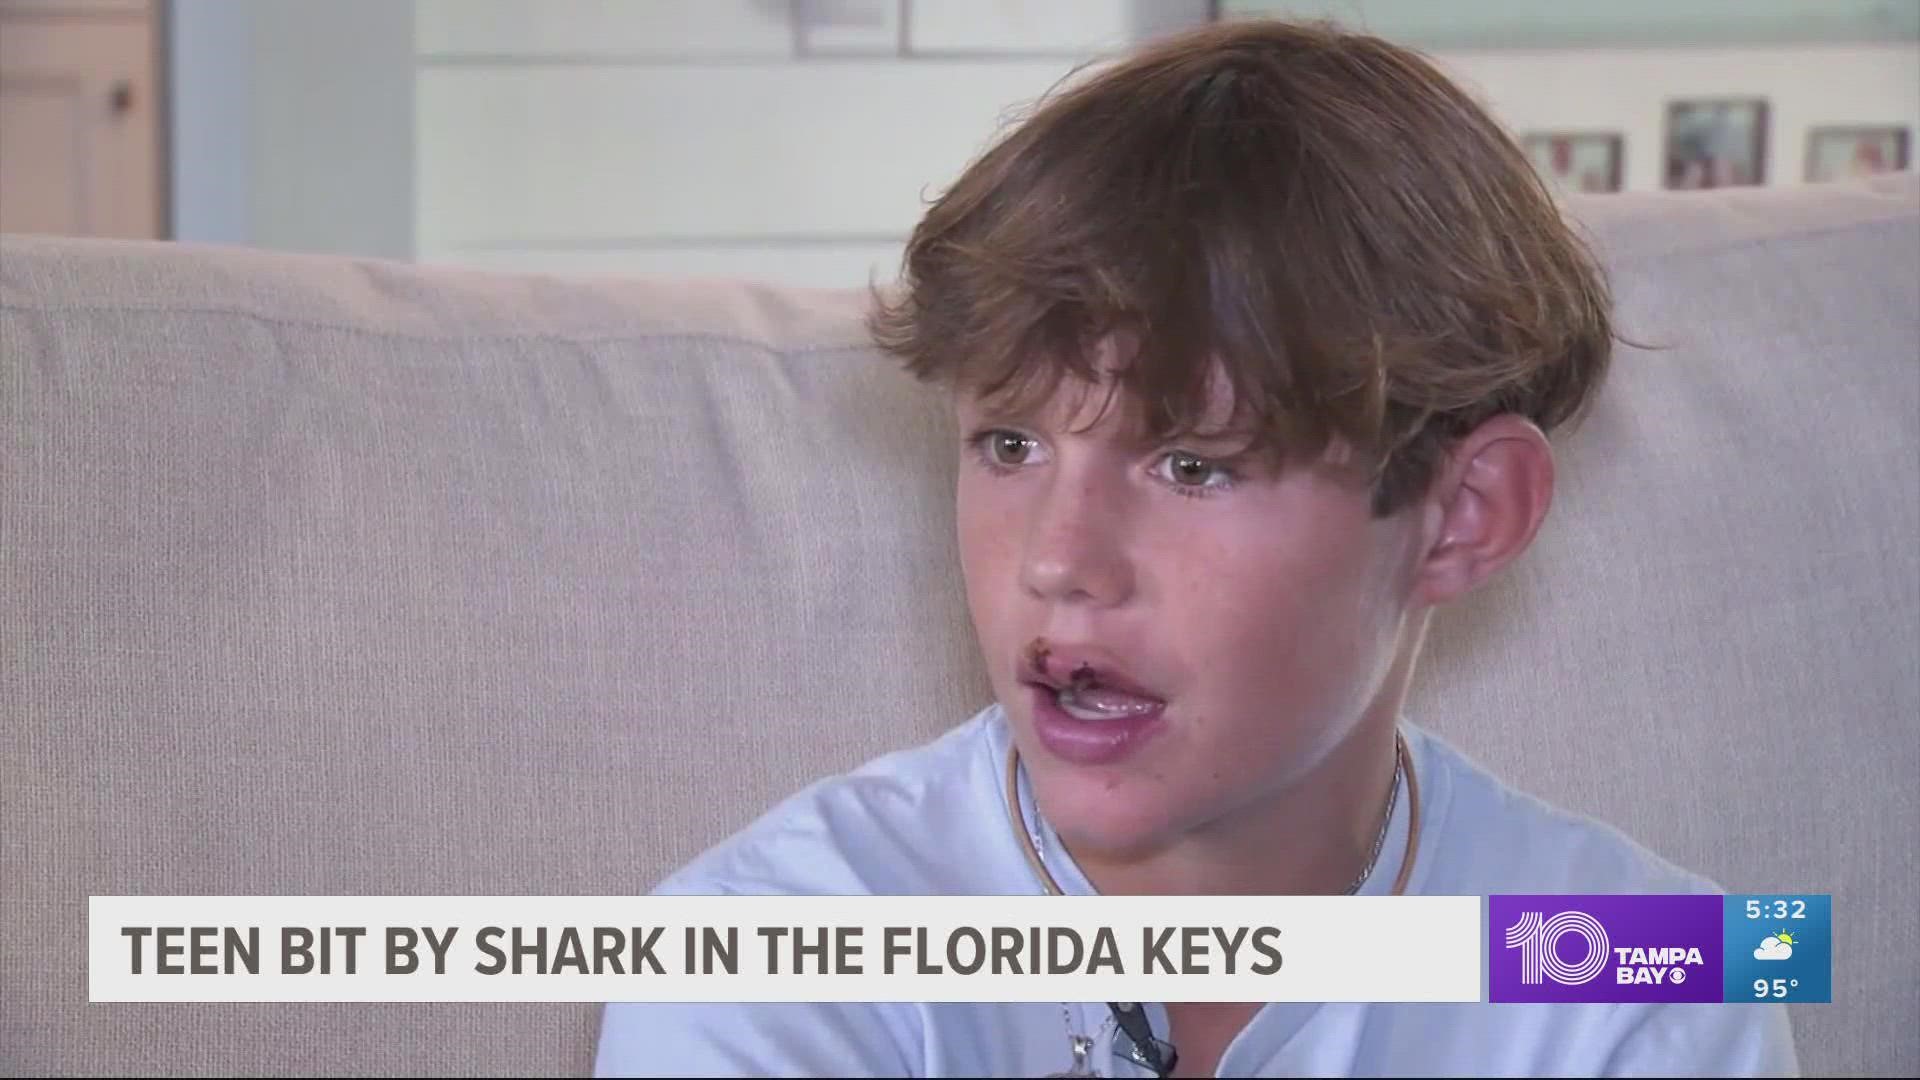 The teen says he was attacked by a nurse shark, a species usually known to be docile.